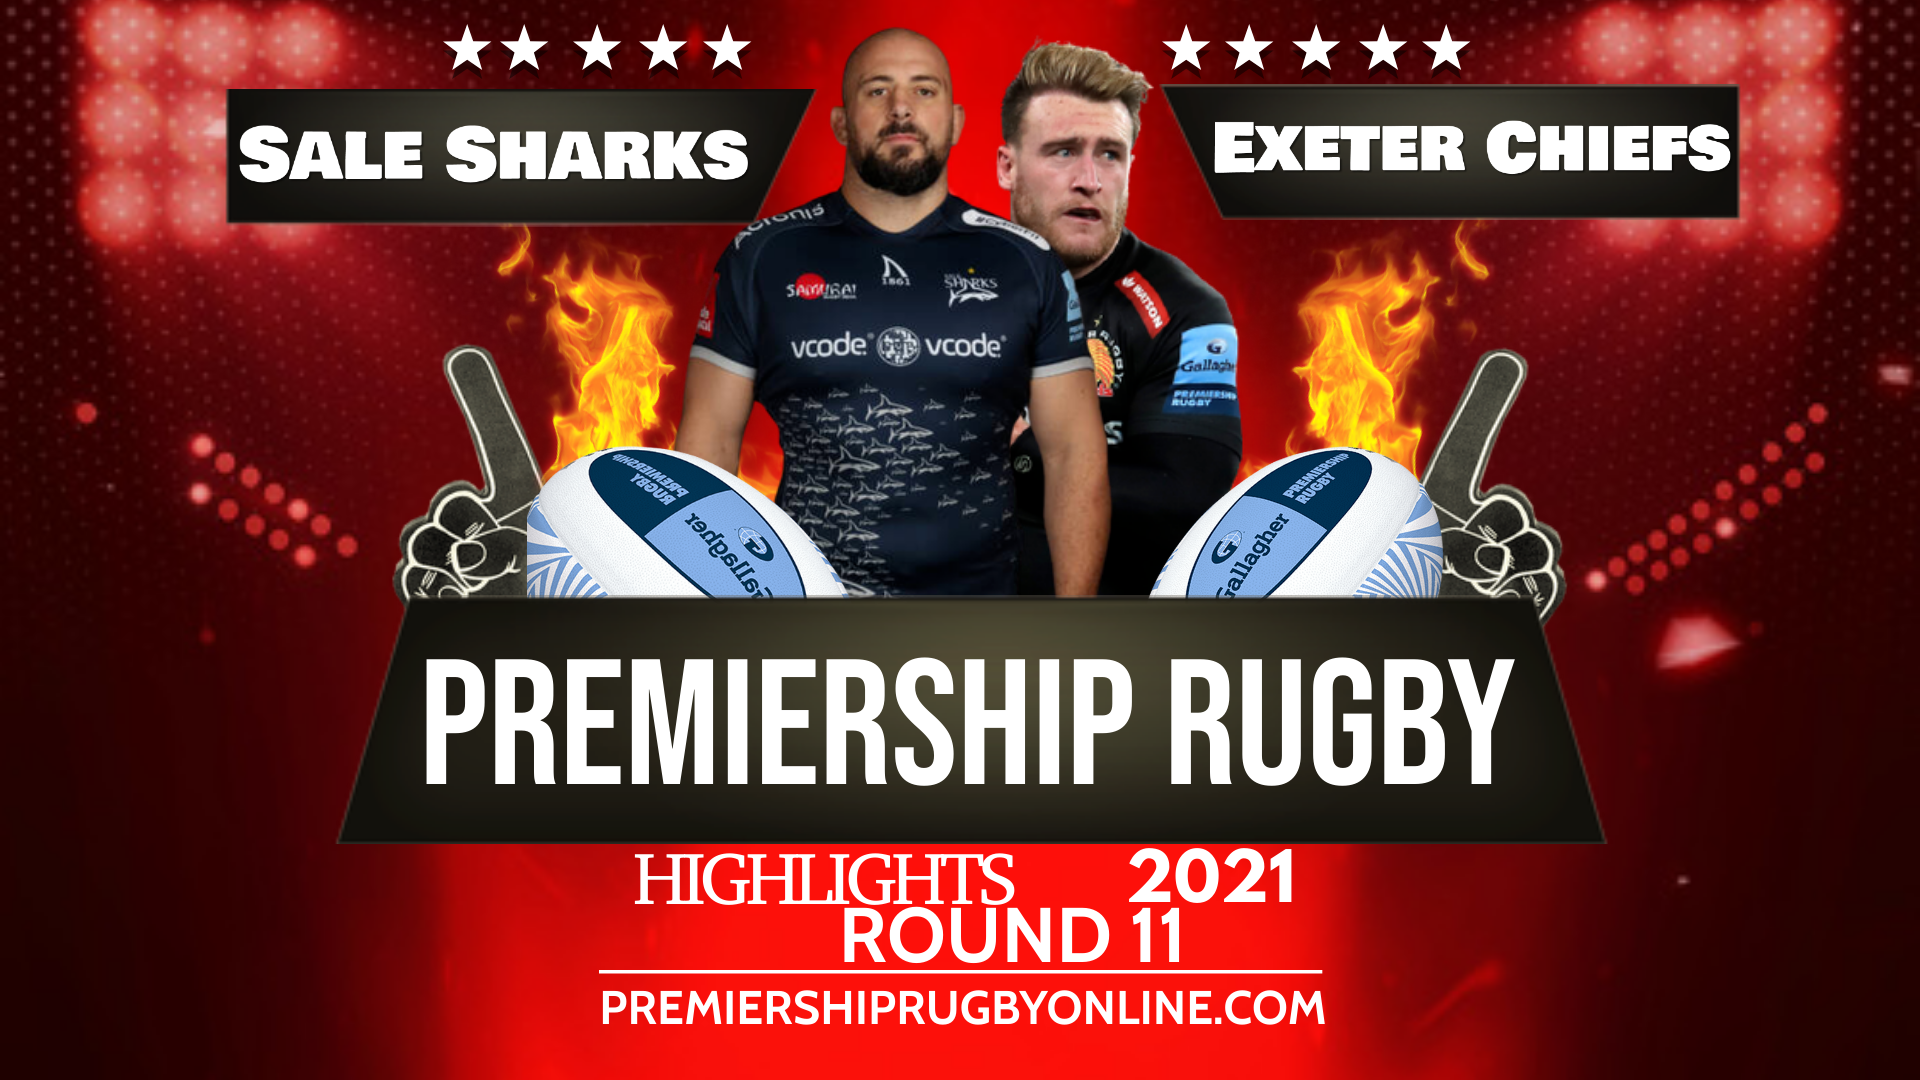 Sale Sharks Vs Exeter Chiefs Highlights 2021 RD 11